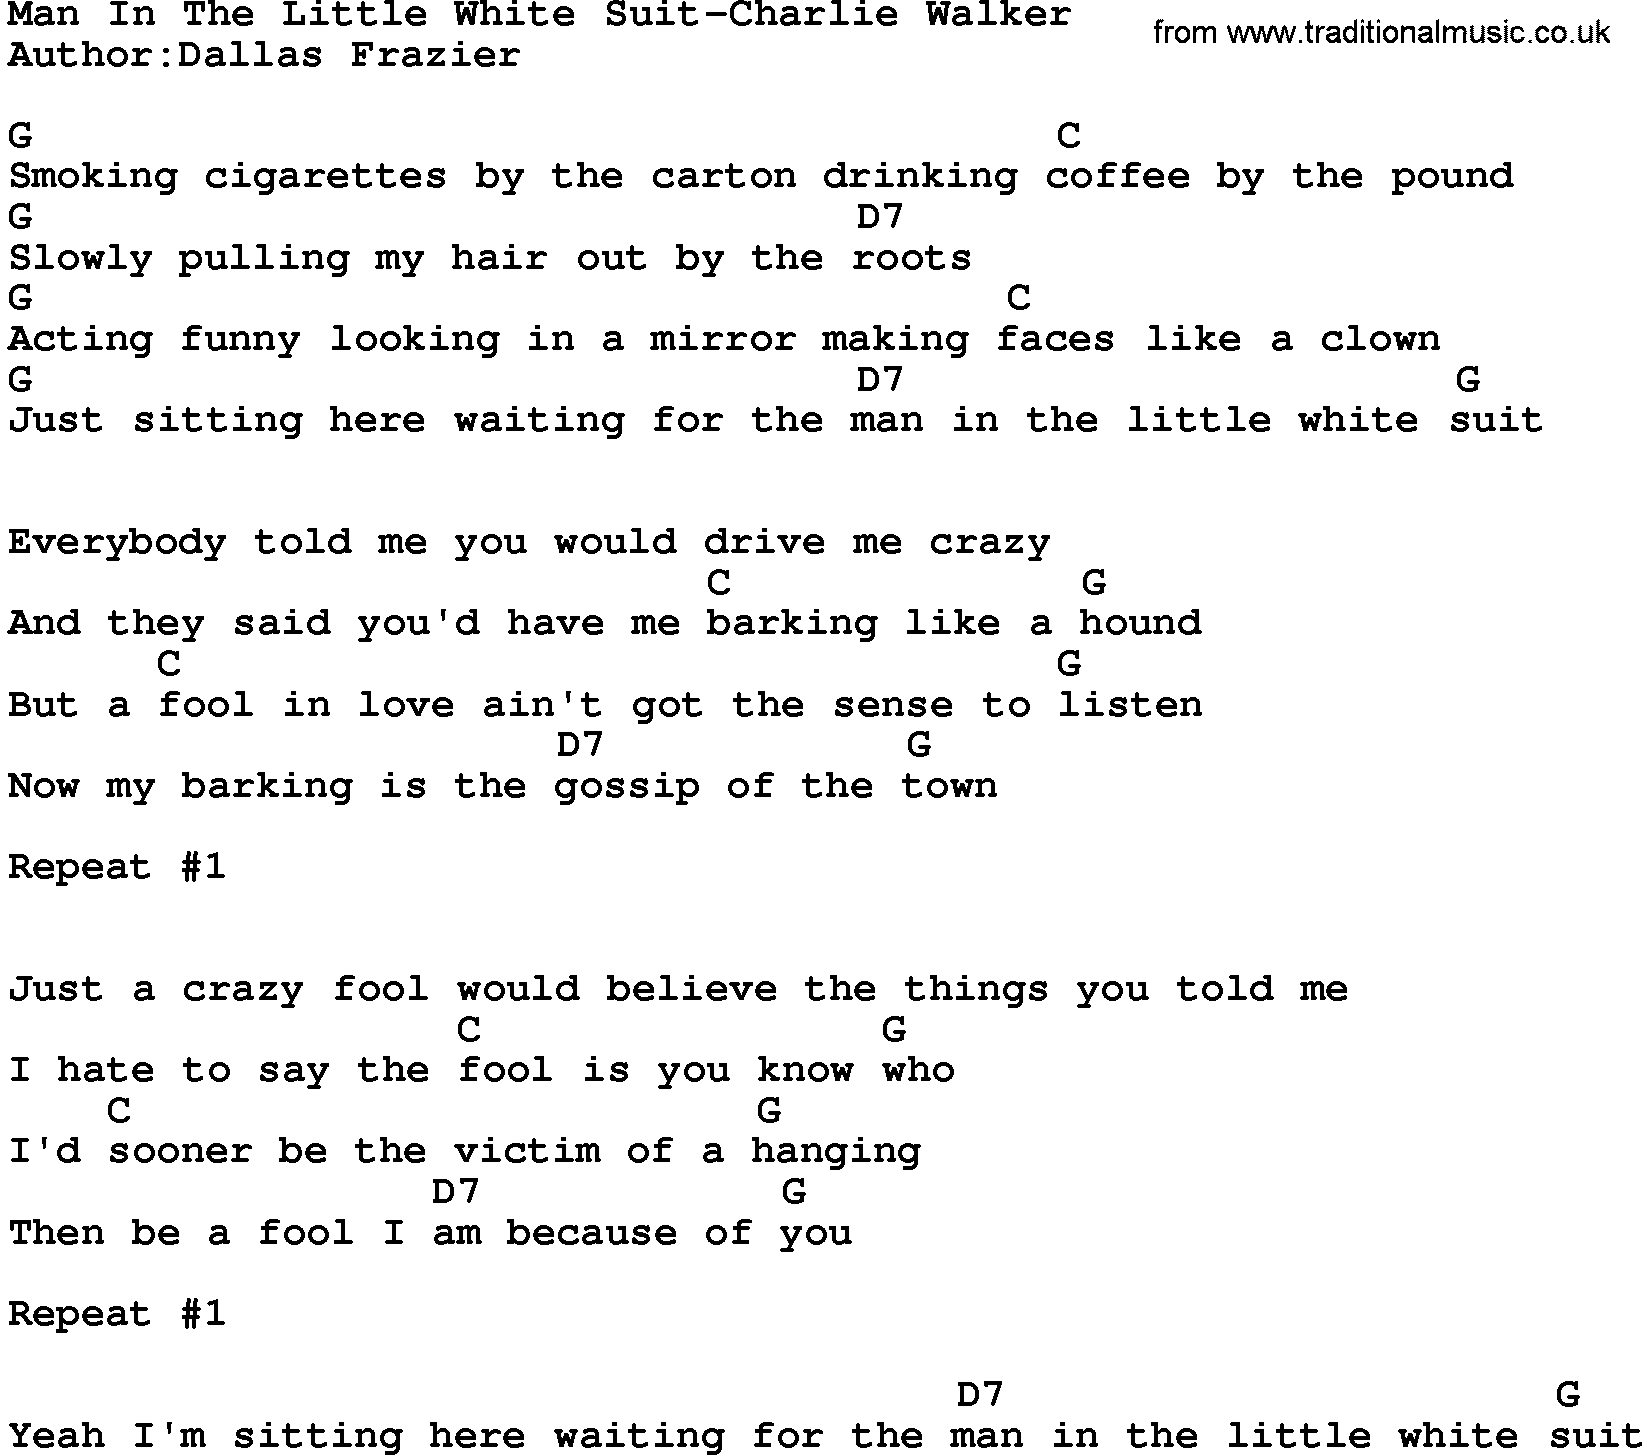 Country music song: Man In The Little White Suit-Charlie Walker lyrics and chords